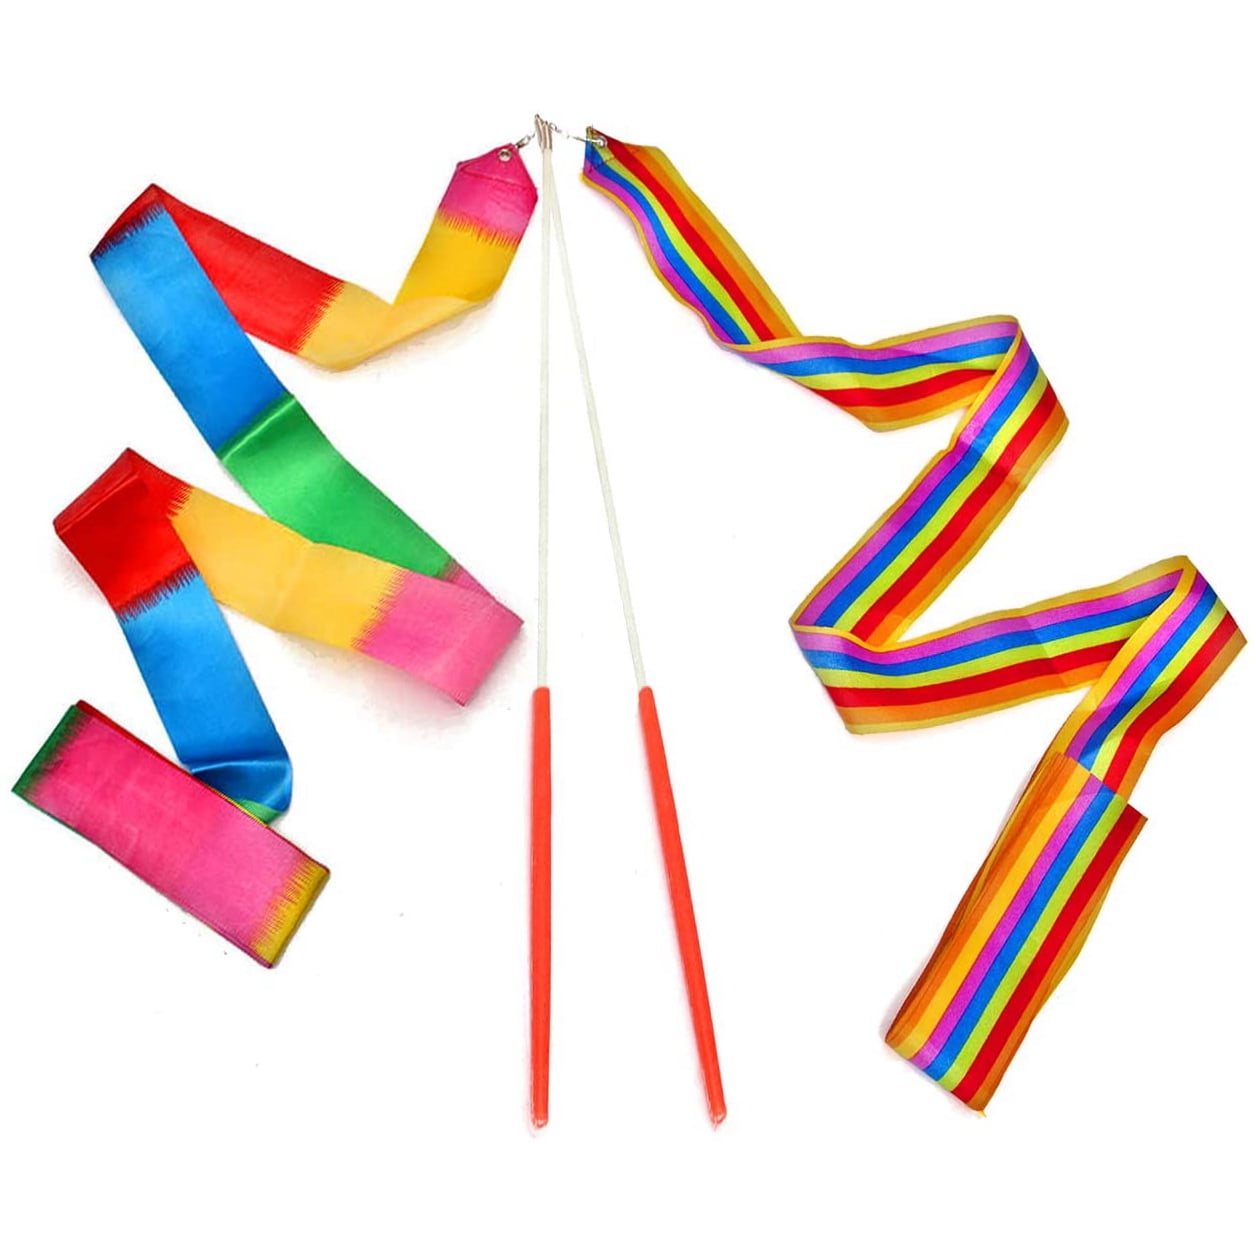 1X Handheld Rainbow Dance Ribbon Stage Props Toys for Children Multi Colored .Z3 